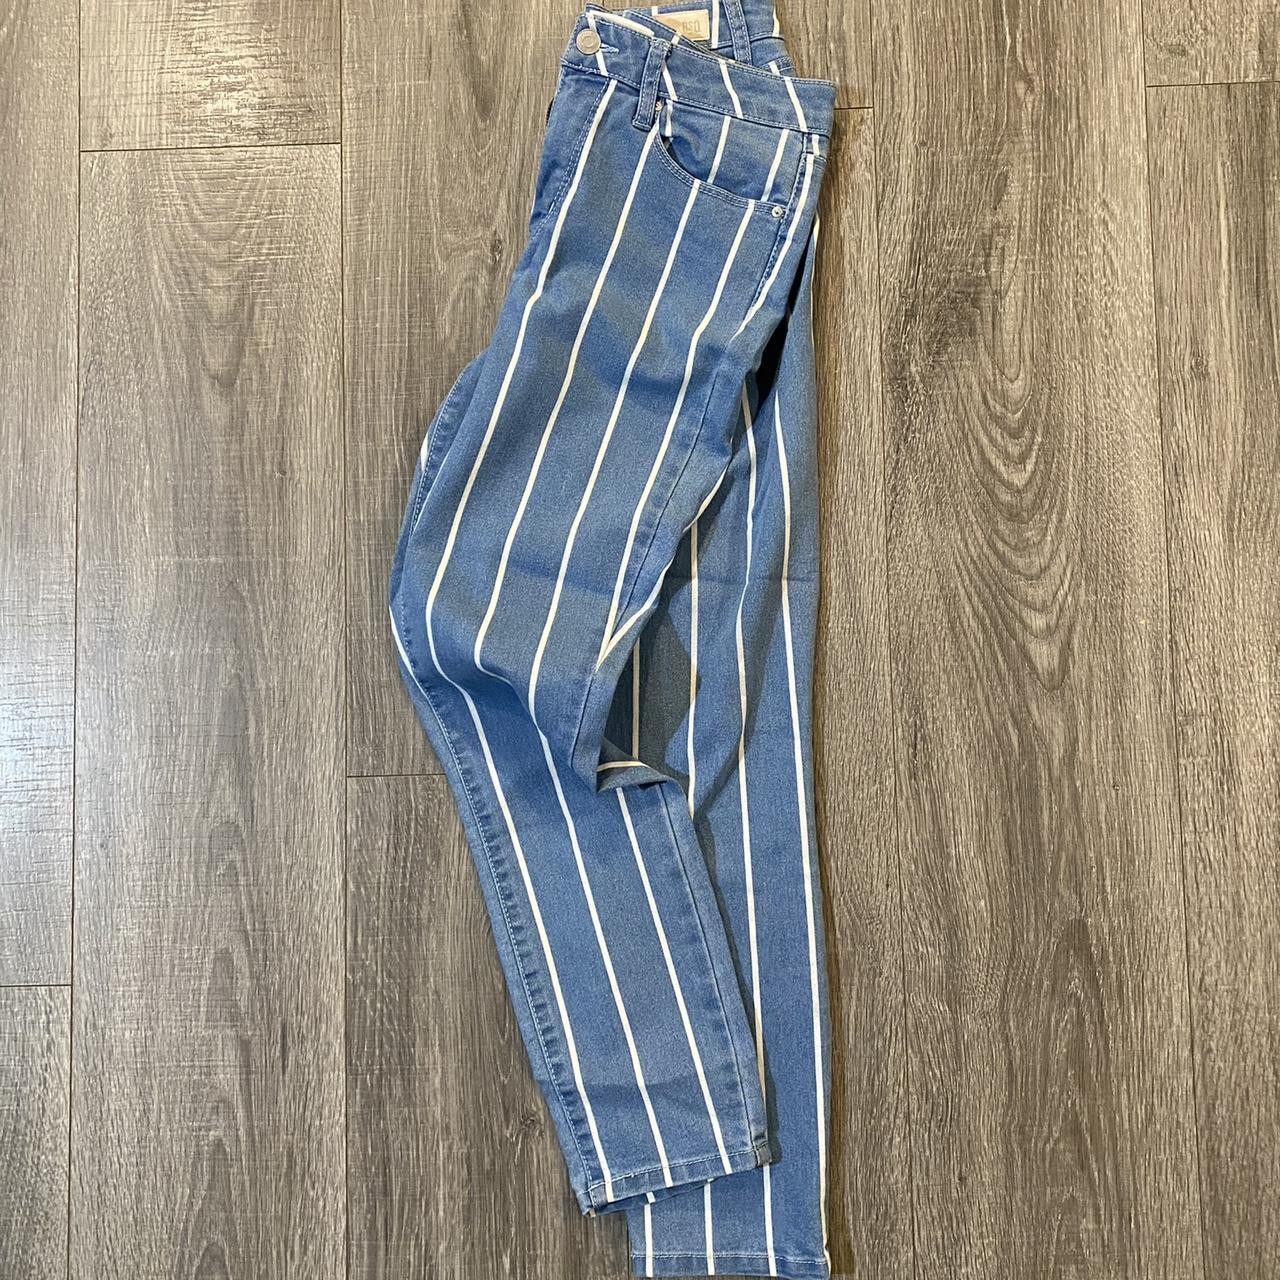 RSQ JEANS Women's striped RSQ jeans Cali high - Depop